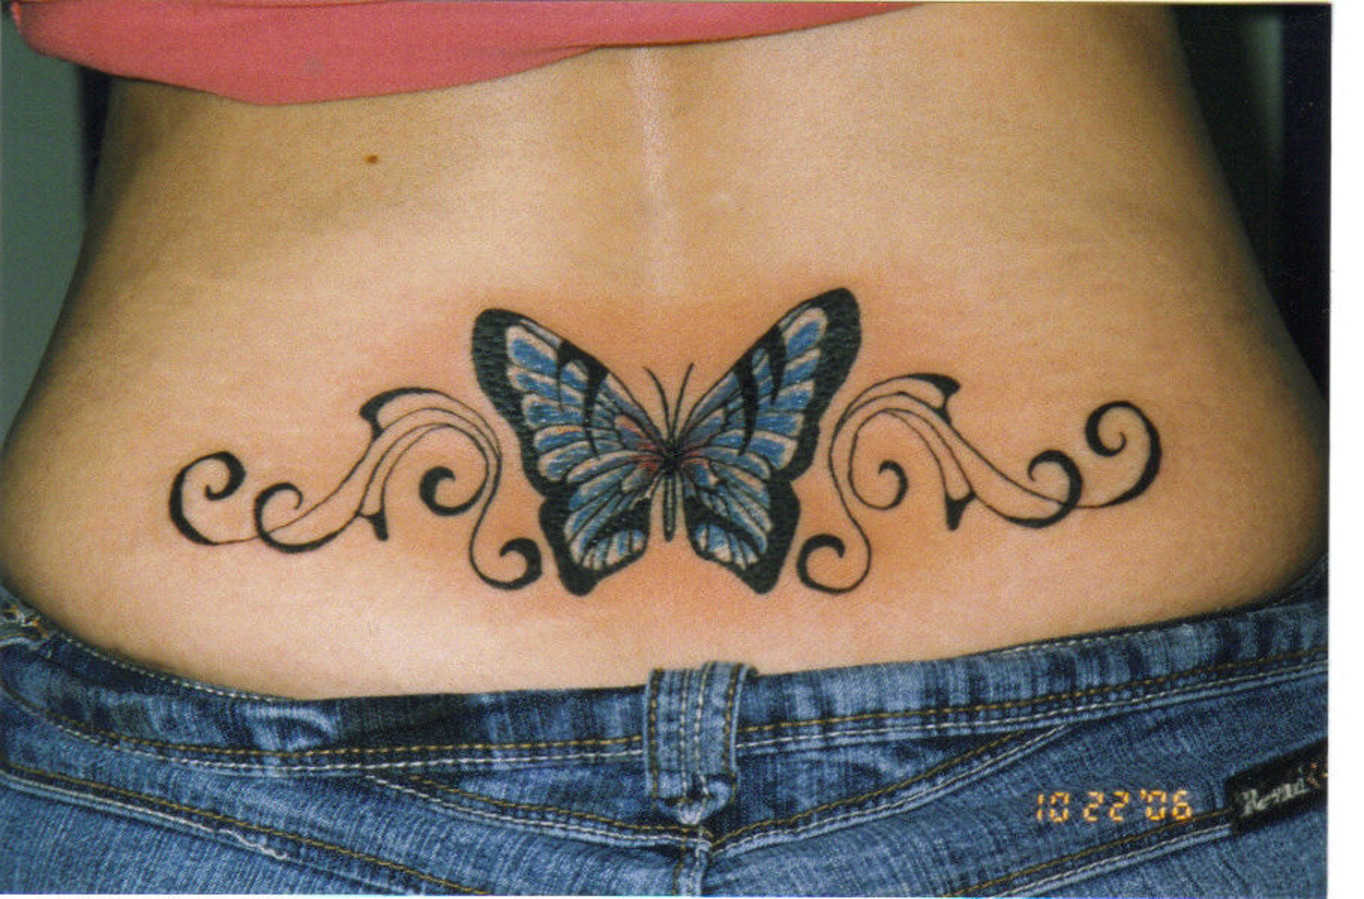 1. Lower Back Tattoos for Women - wide 2